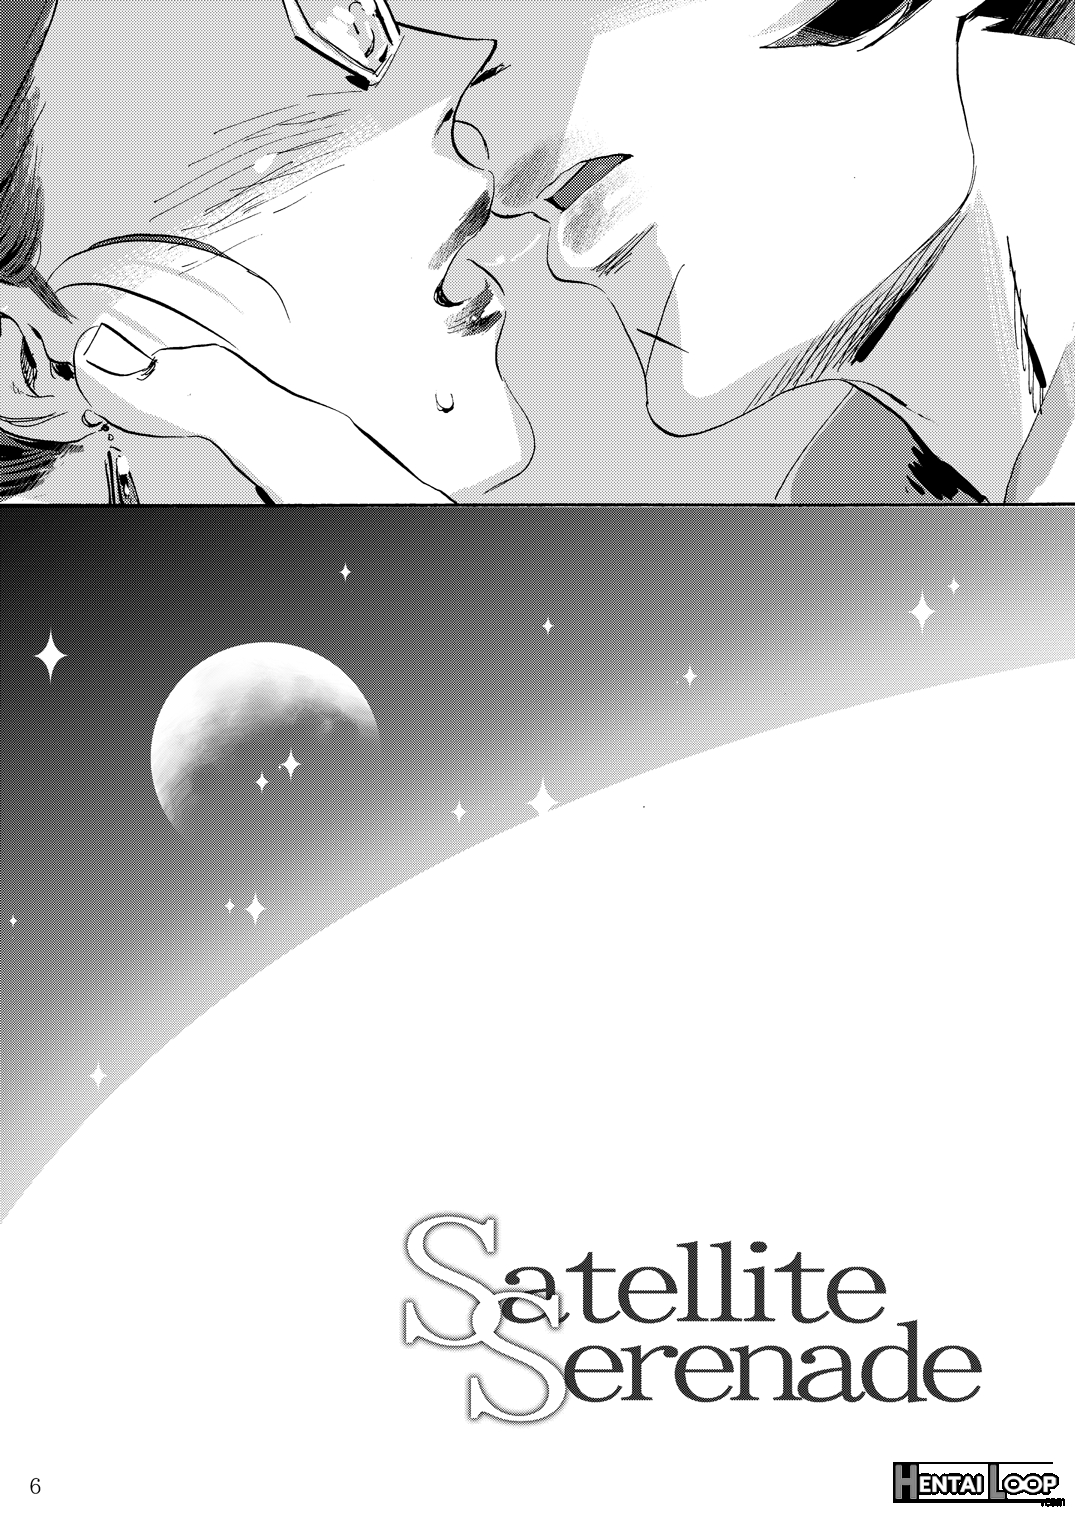 Satellite Serenade -another Dimension- page 5